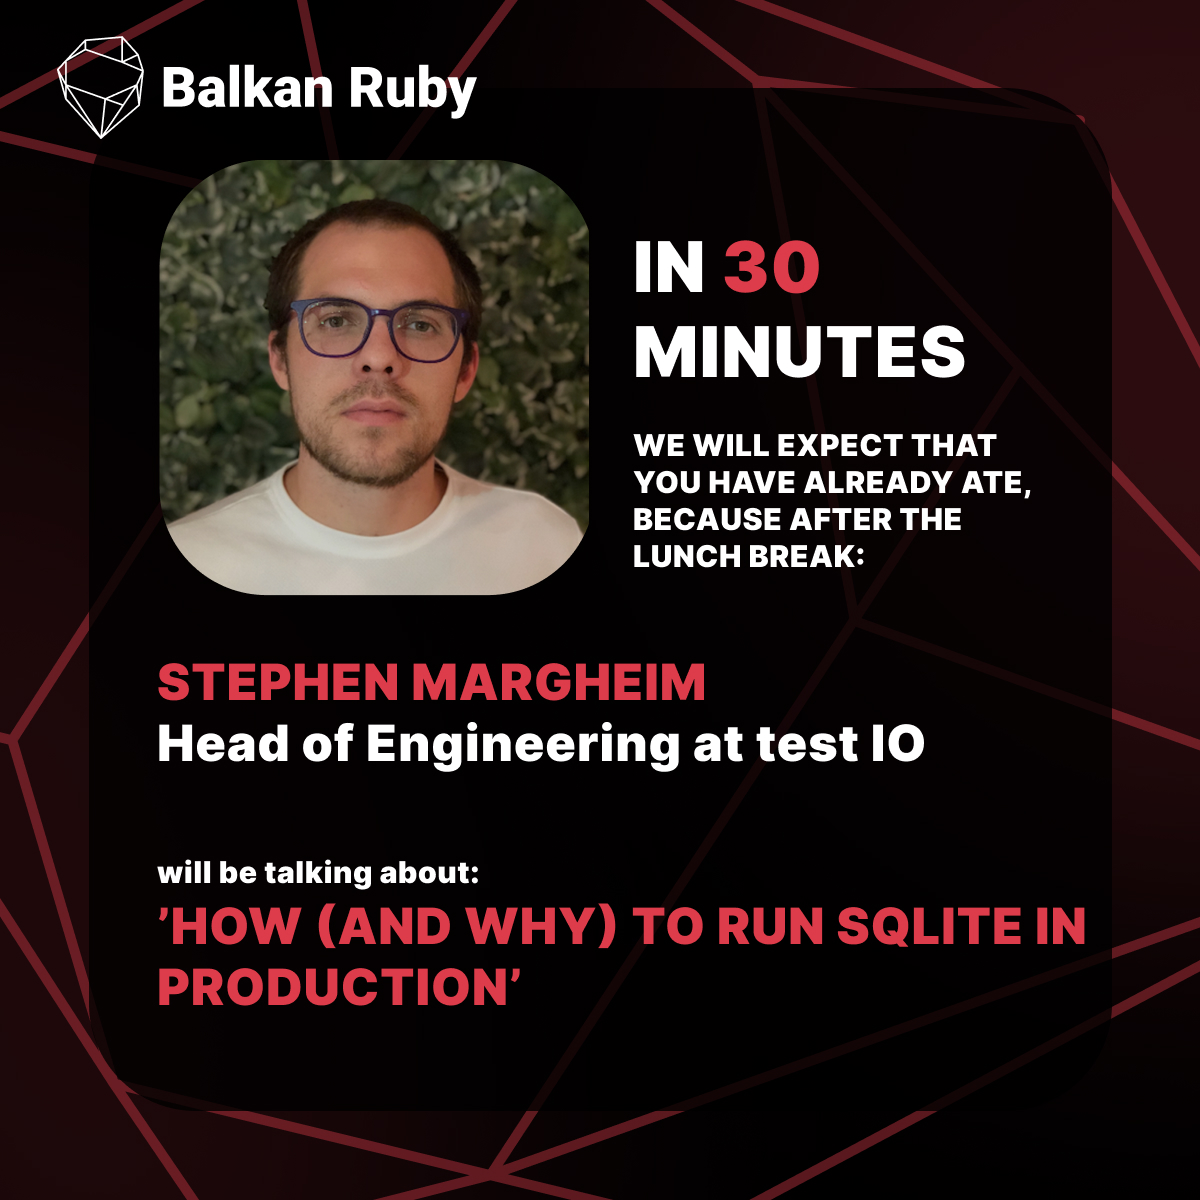 Stephen Margheim, a.k.a. @fractaledmind, will unveil 'How (and why) to run SQLite in production' at #BalkanRuby